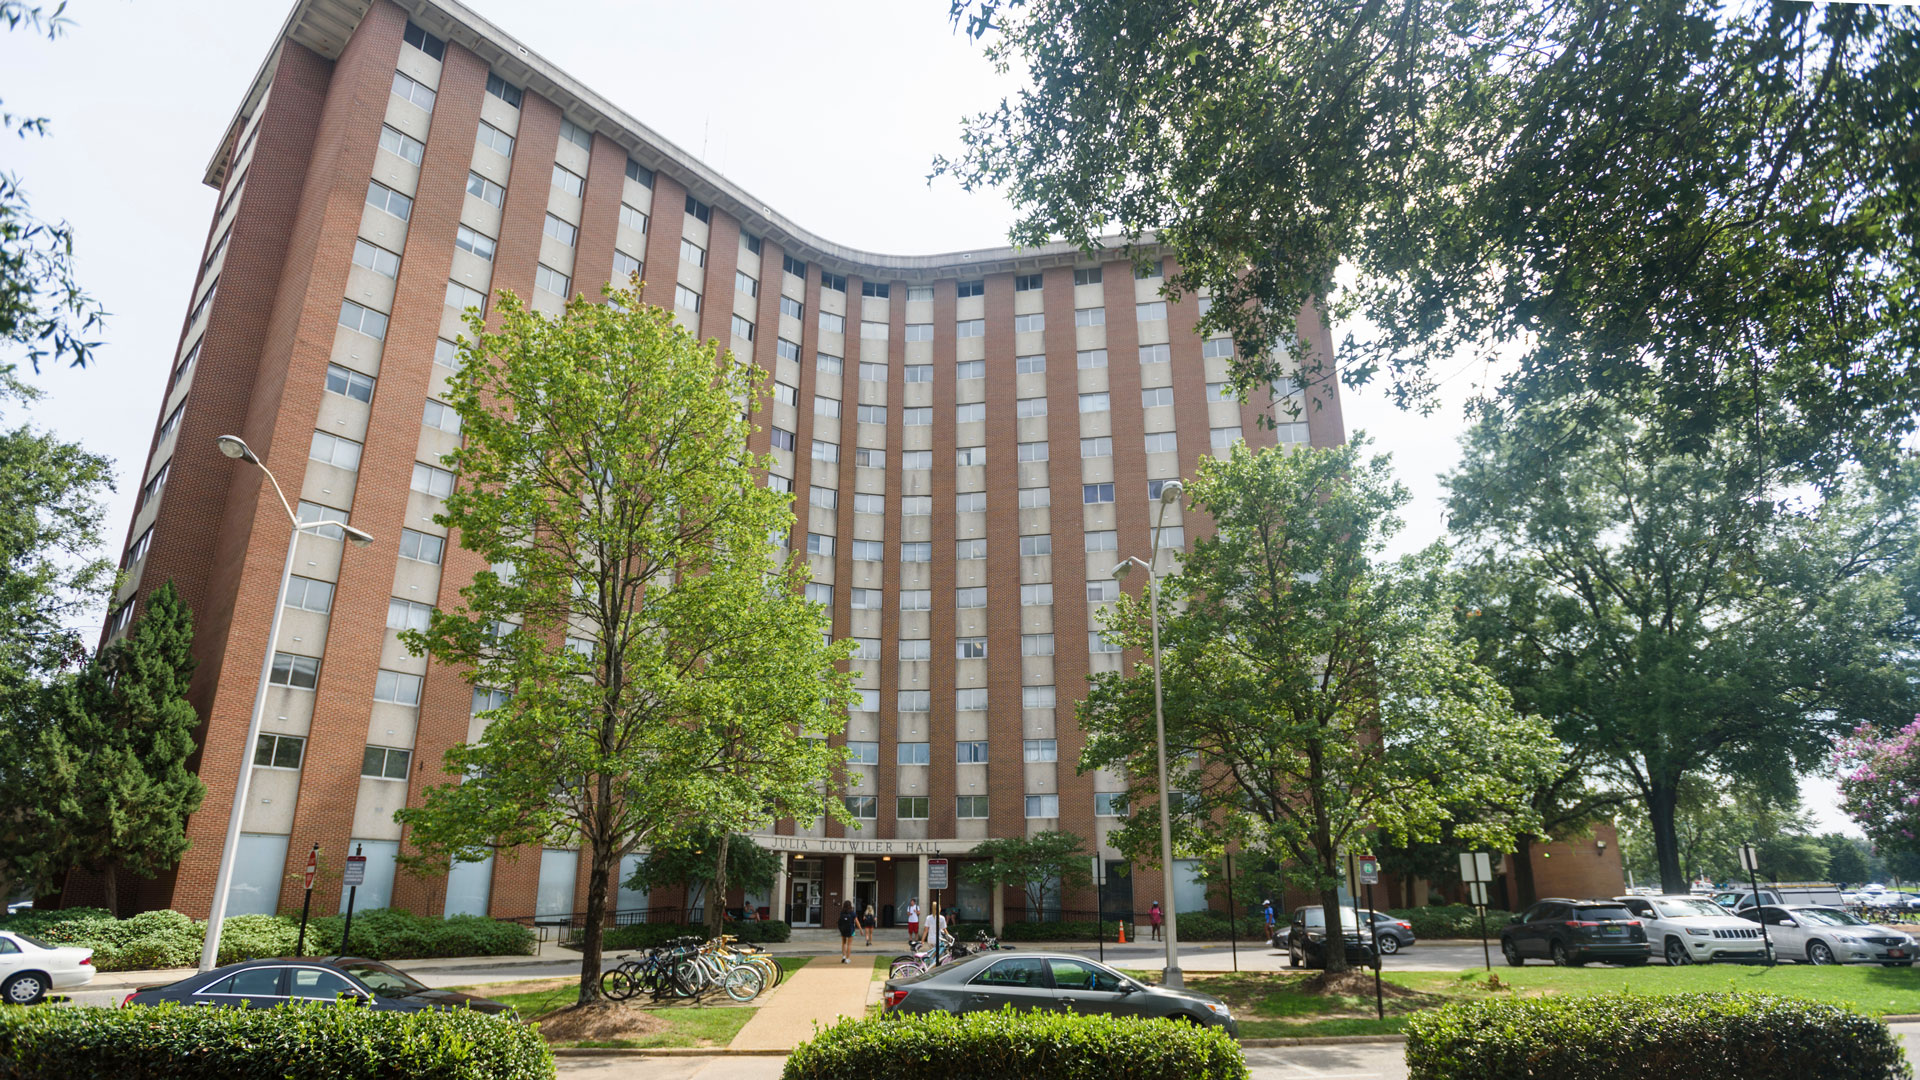 the exterior of Tutwiler Hall